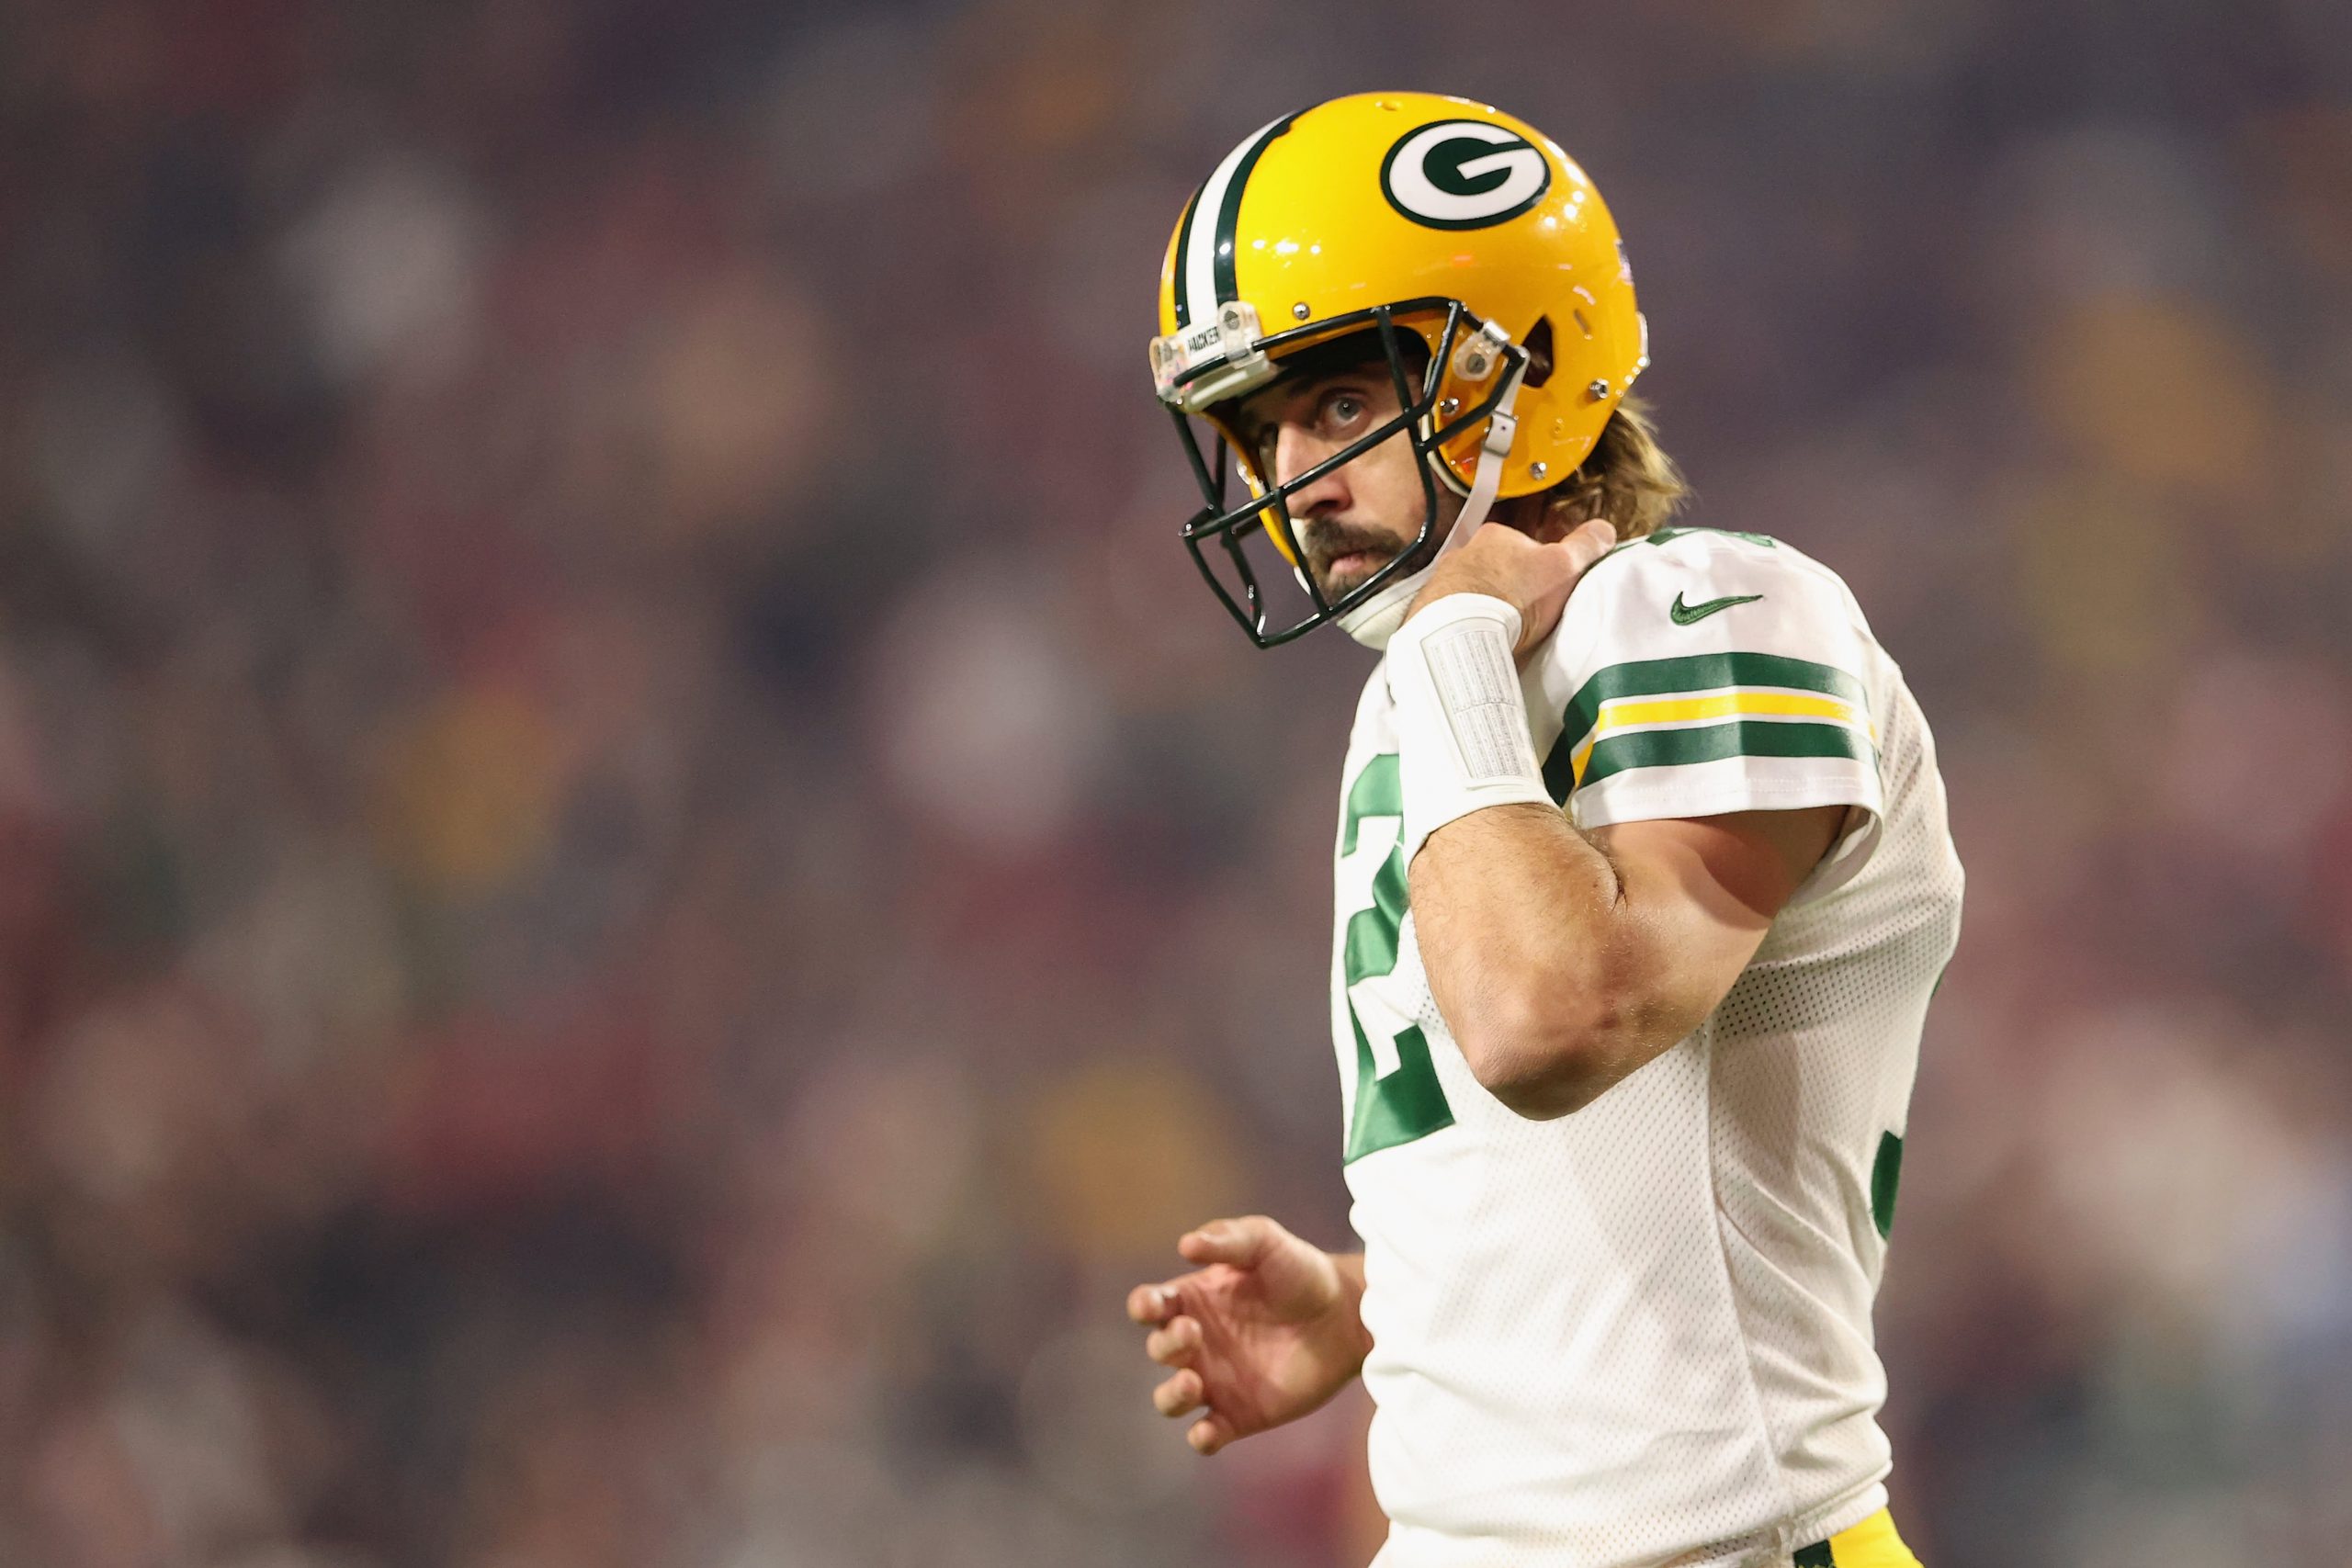 Aaron Rodgers says he is returning to the Green Bay Packers